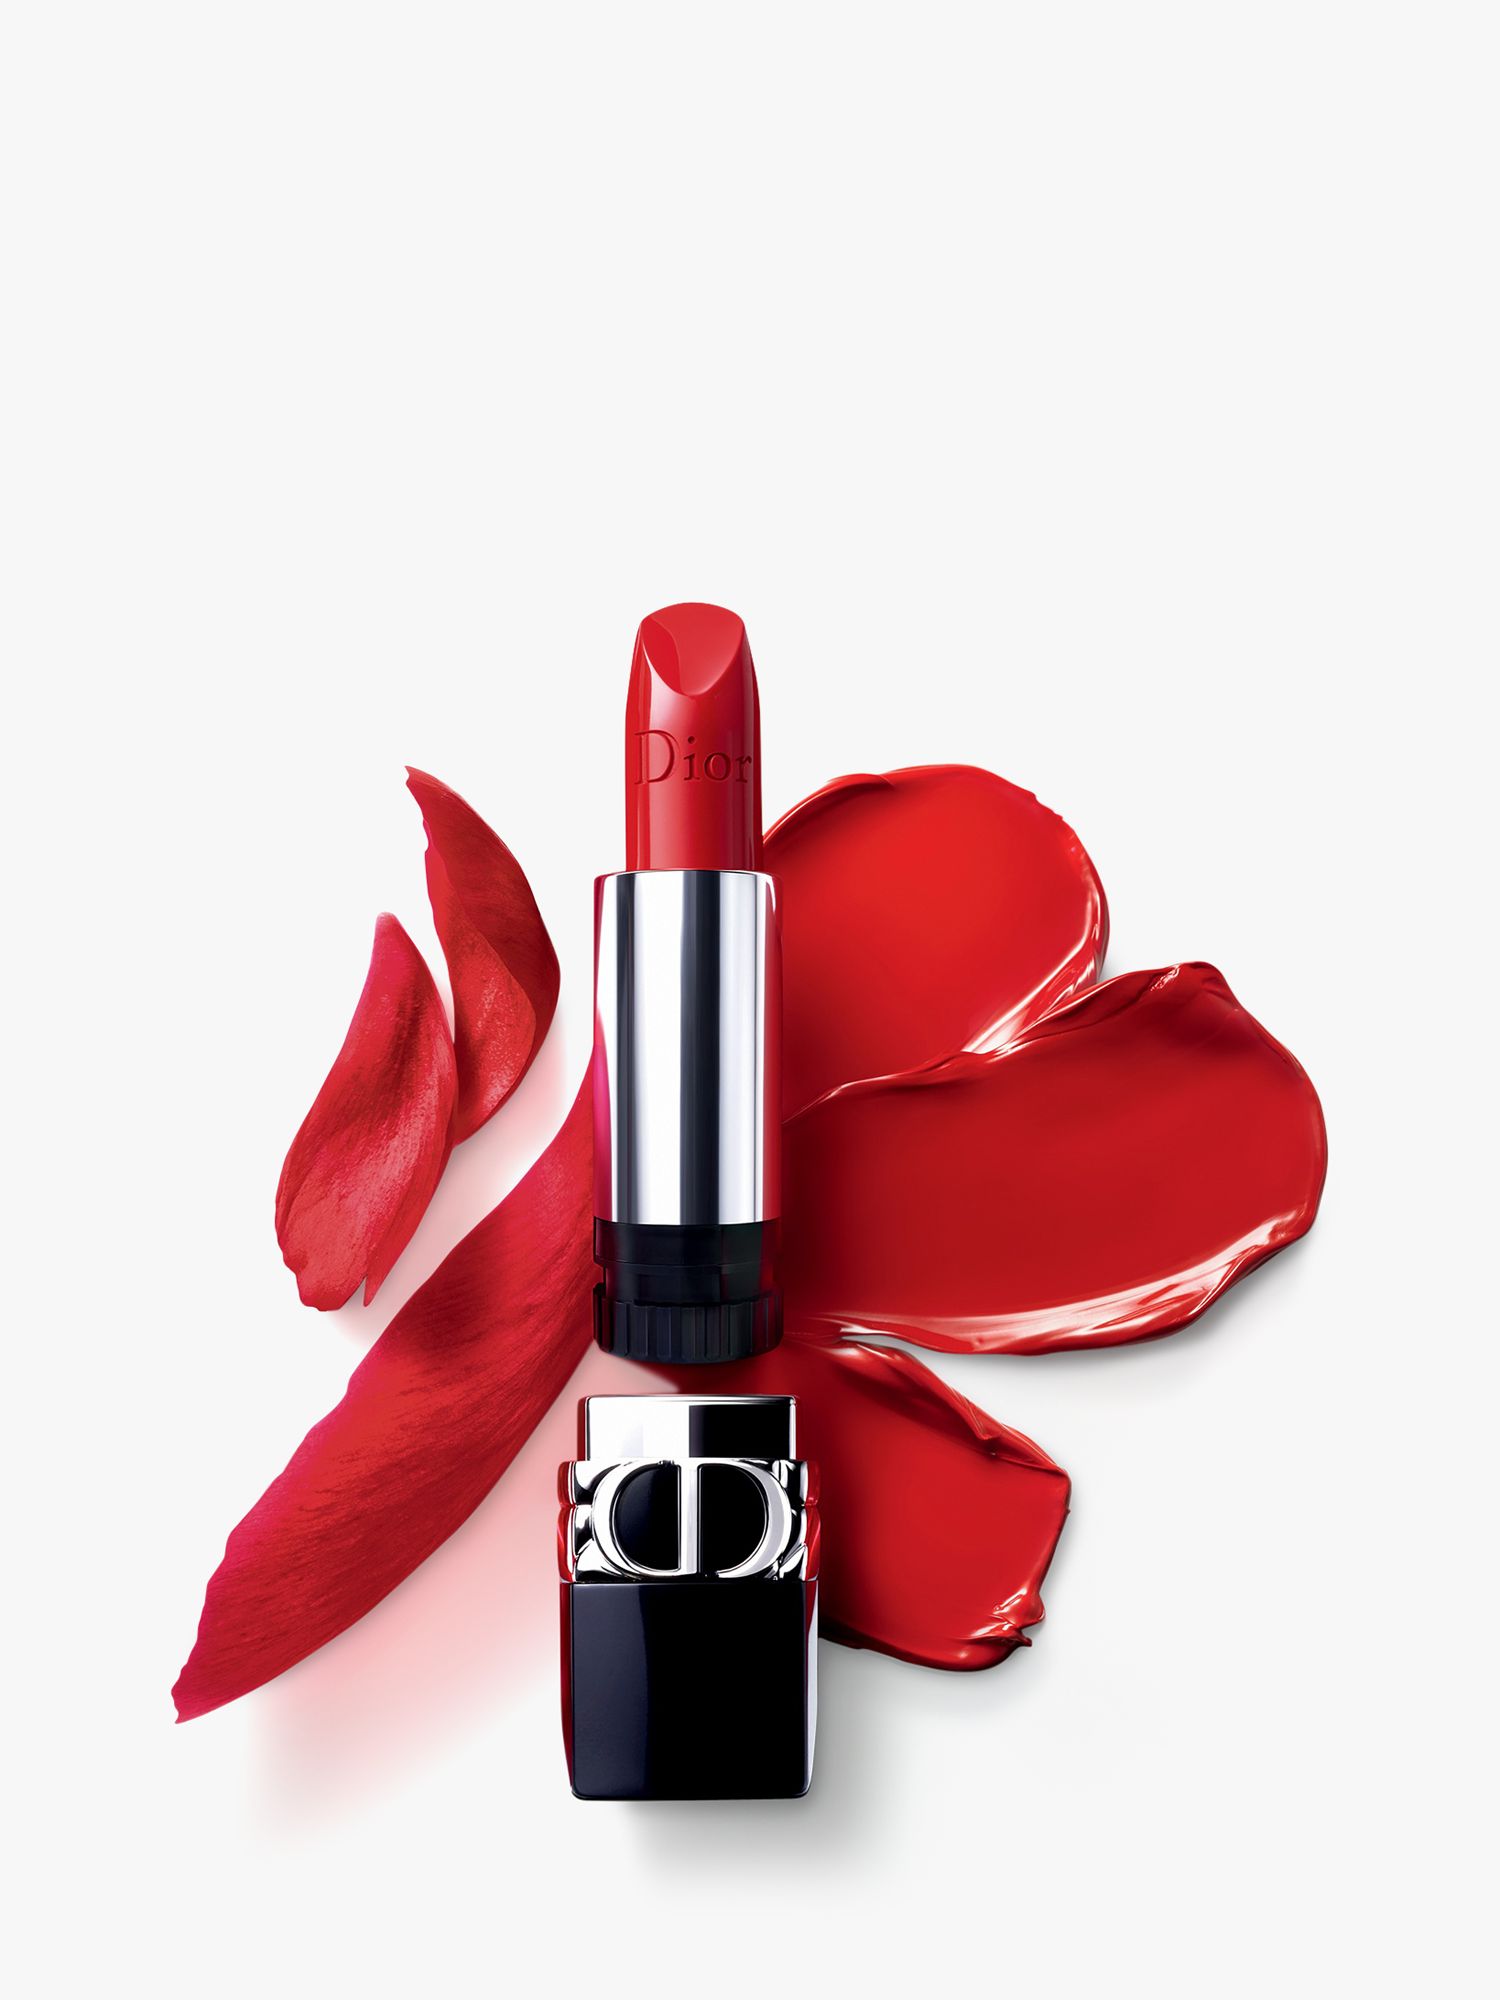 DIOR Rouge DIOR Couture Colour Lipstick, Satin, 028 Actrice at John ...